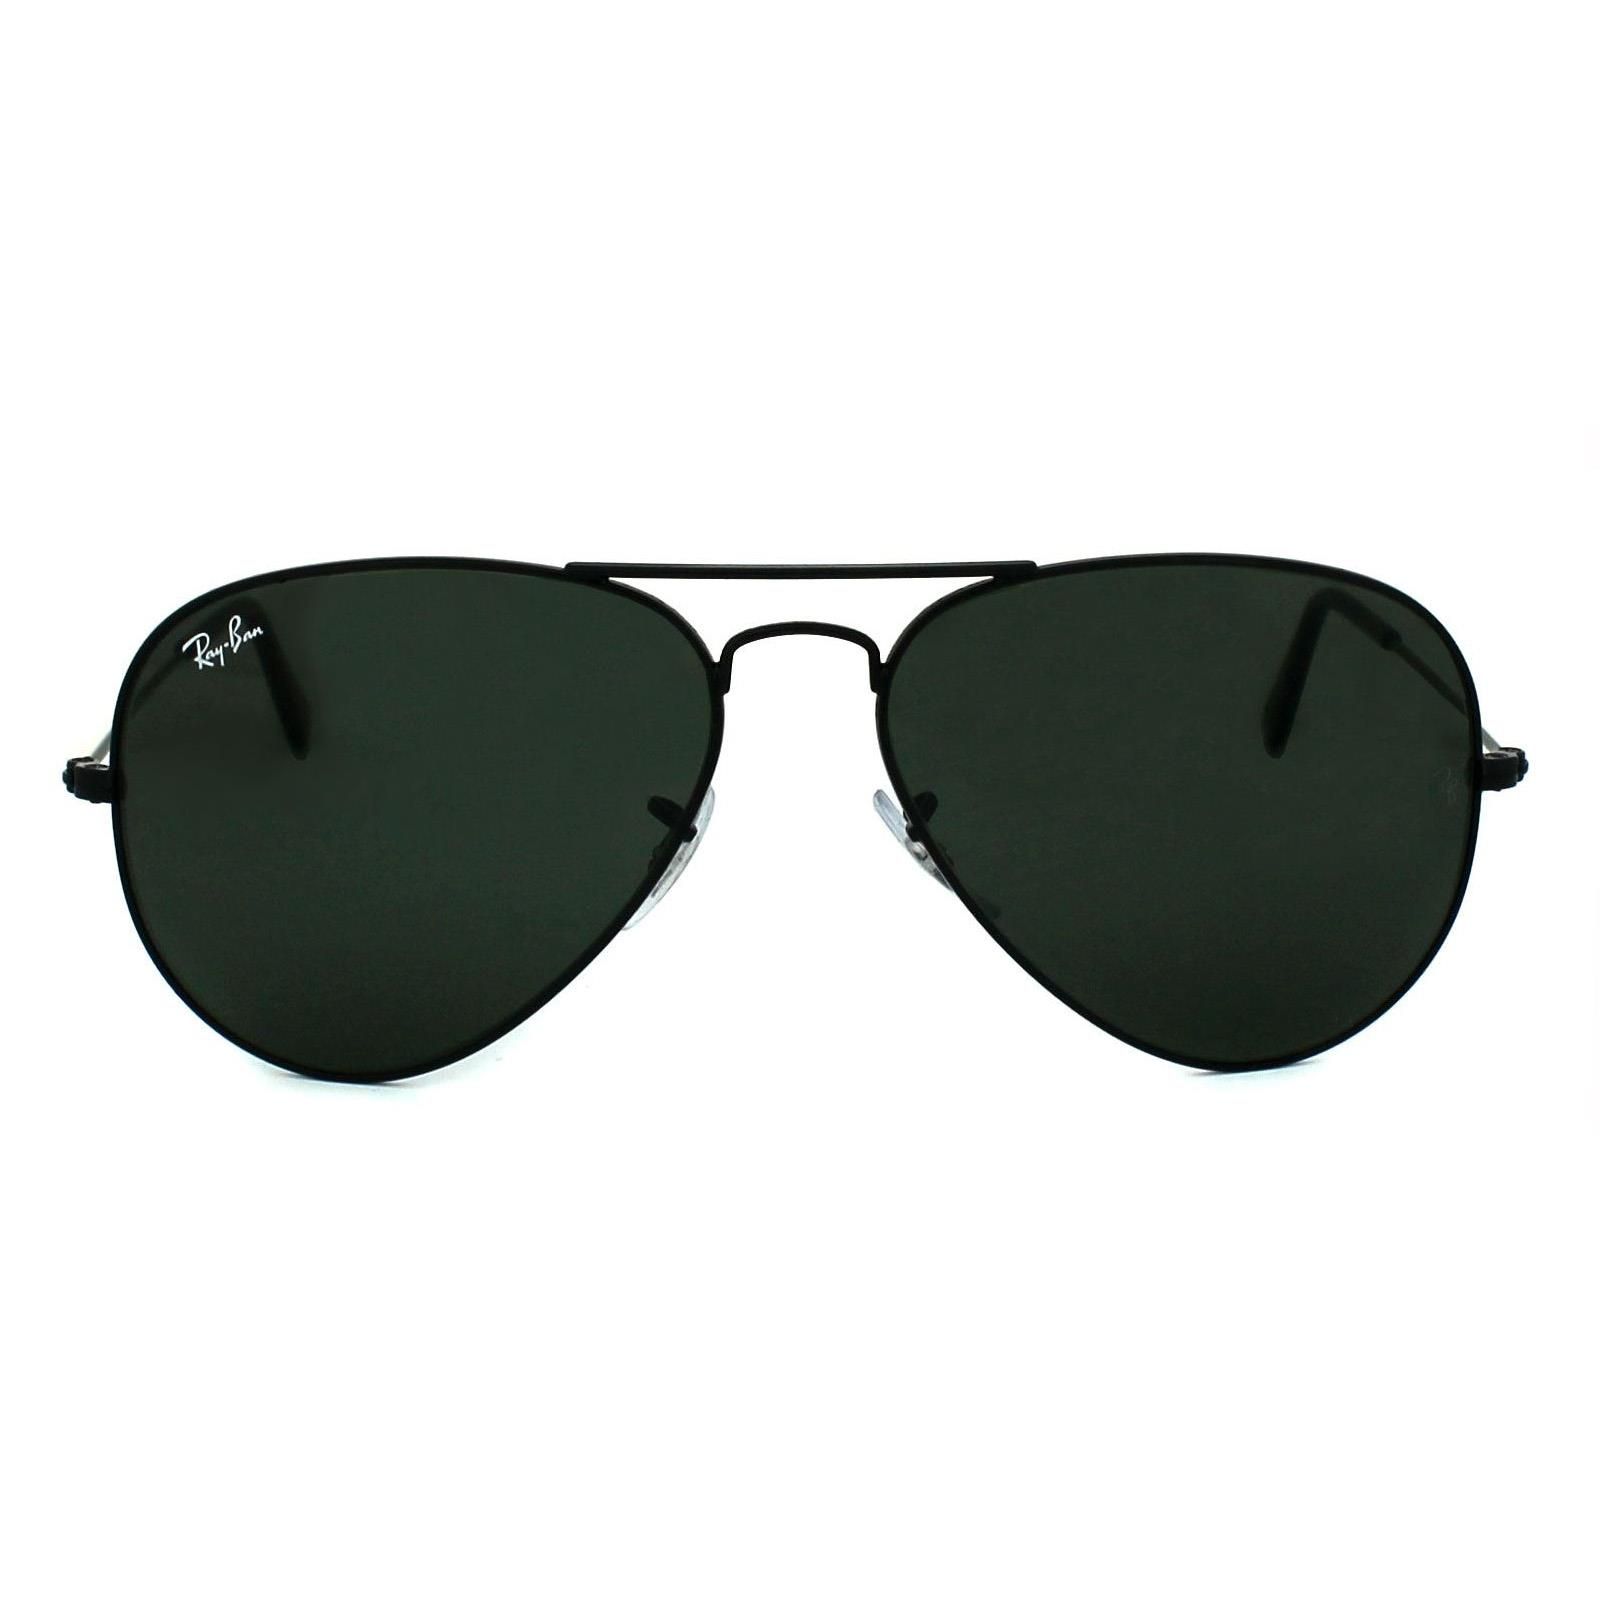 Ray-Ban Sunglasses Aviator 3025 L2823 Black Green were originally designed in 1936 for US military pilots and have since become one of the most iconic sunglasses models in the world. The timeless design is characterised by the thin metal wire frame, large teardrop shaped lenses and fine metal temples that feature silicone tips and nose pads for a customised and comfortable fit. This classic model is available in various sizes and an array of colourways.